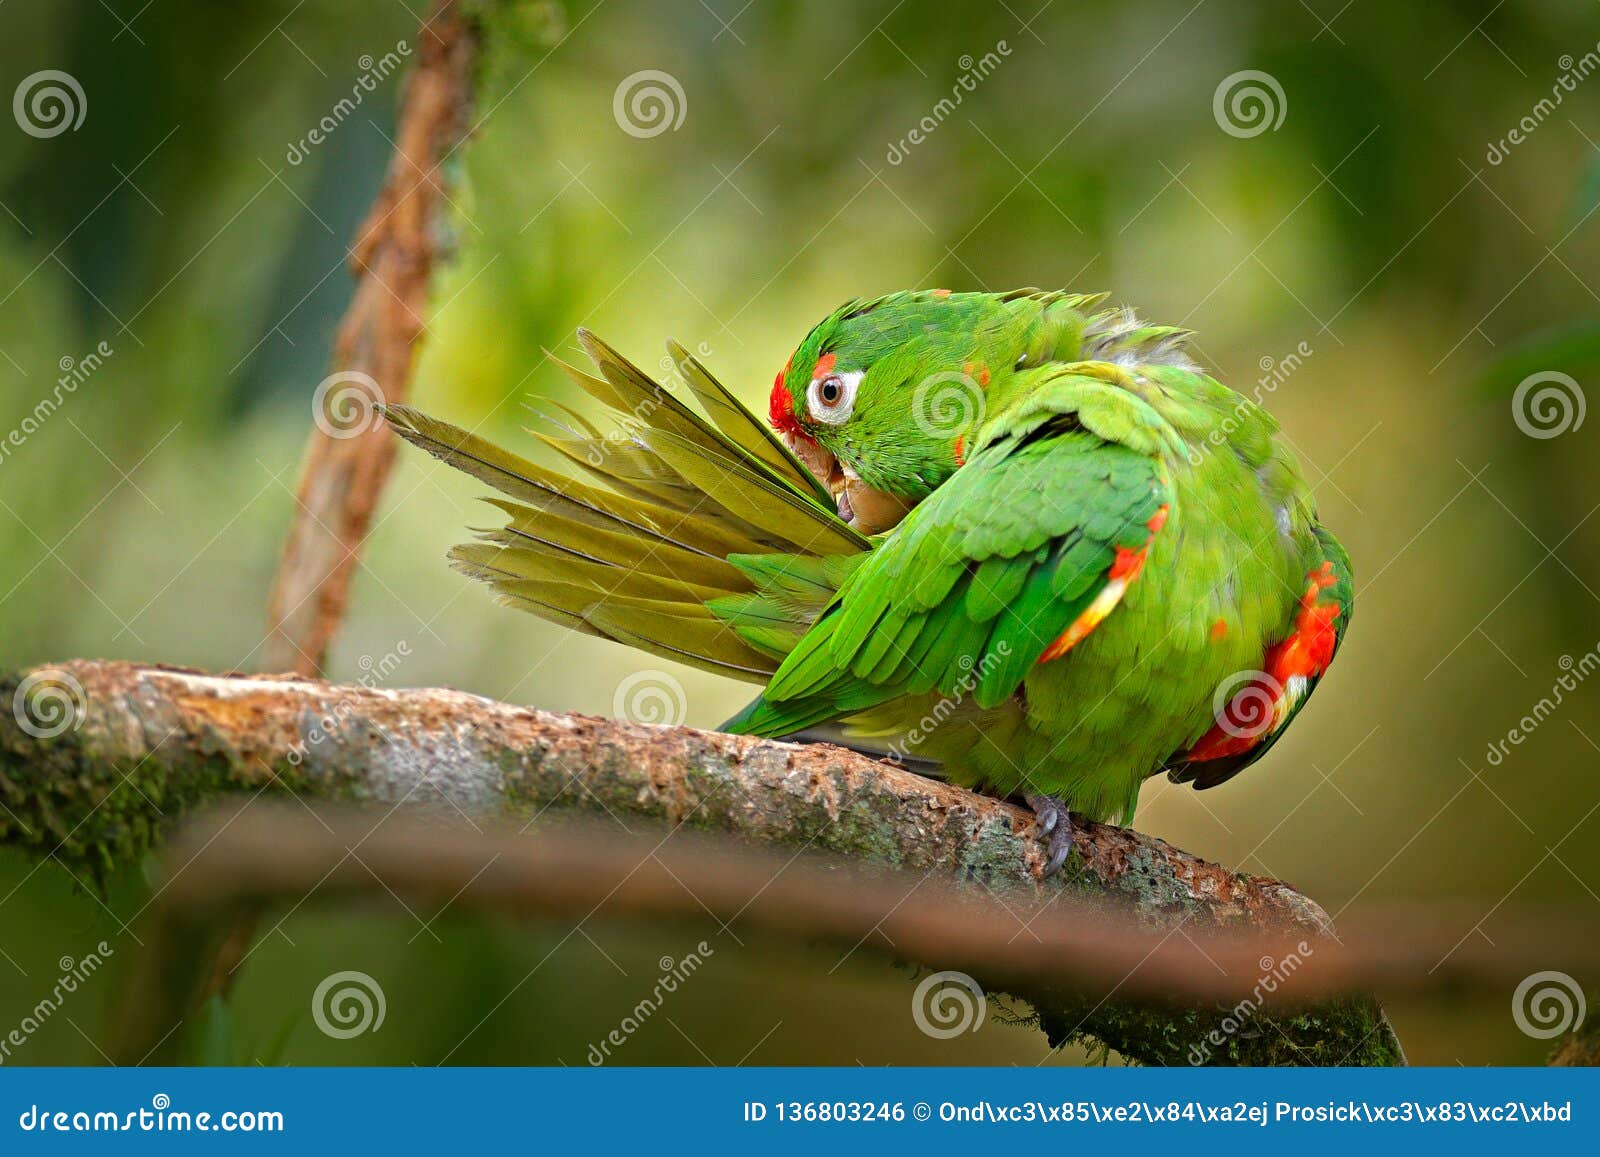 crimson-fronted parakeet aratinga finschi portrait of light green parrot with red head, costa rica. wildlife scene from tropical